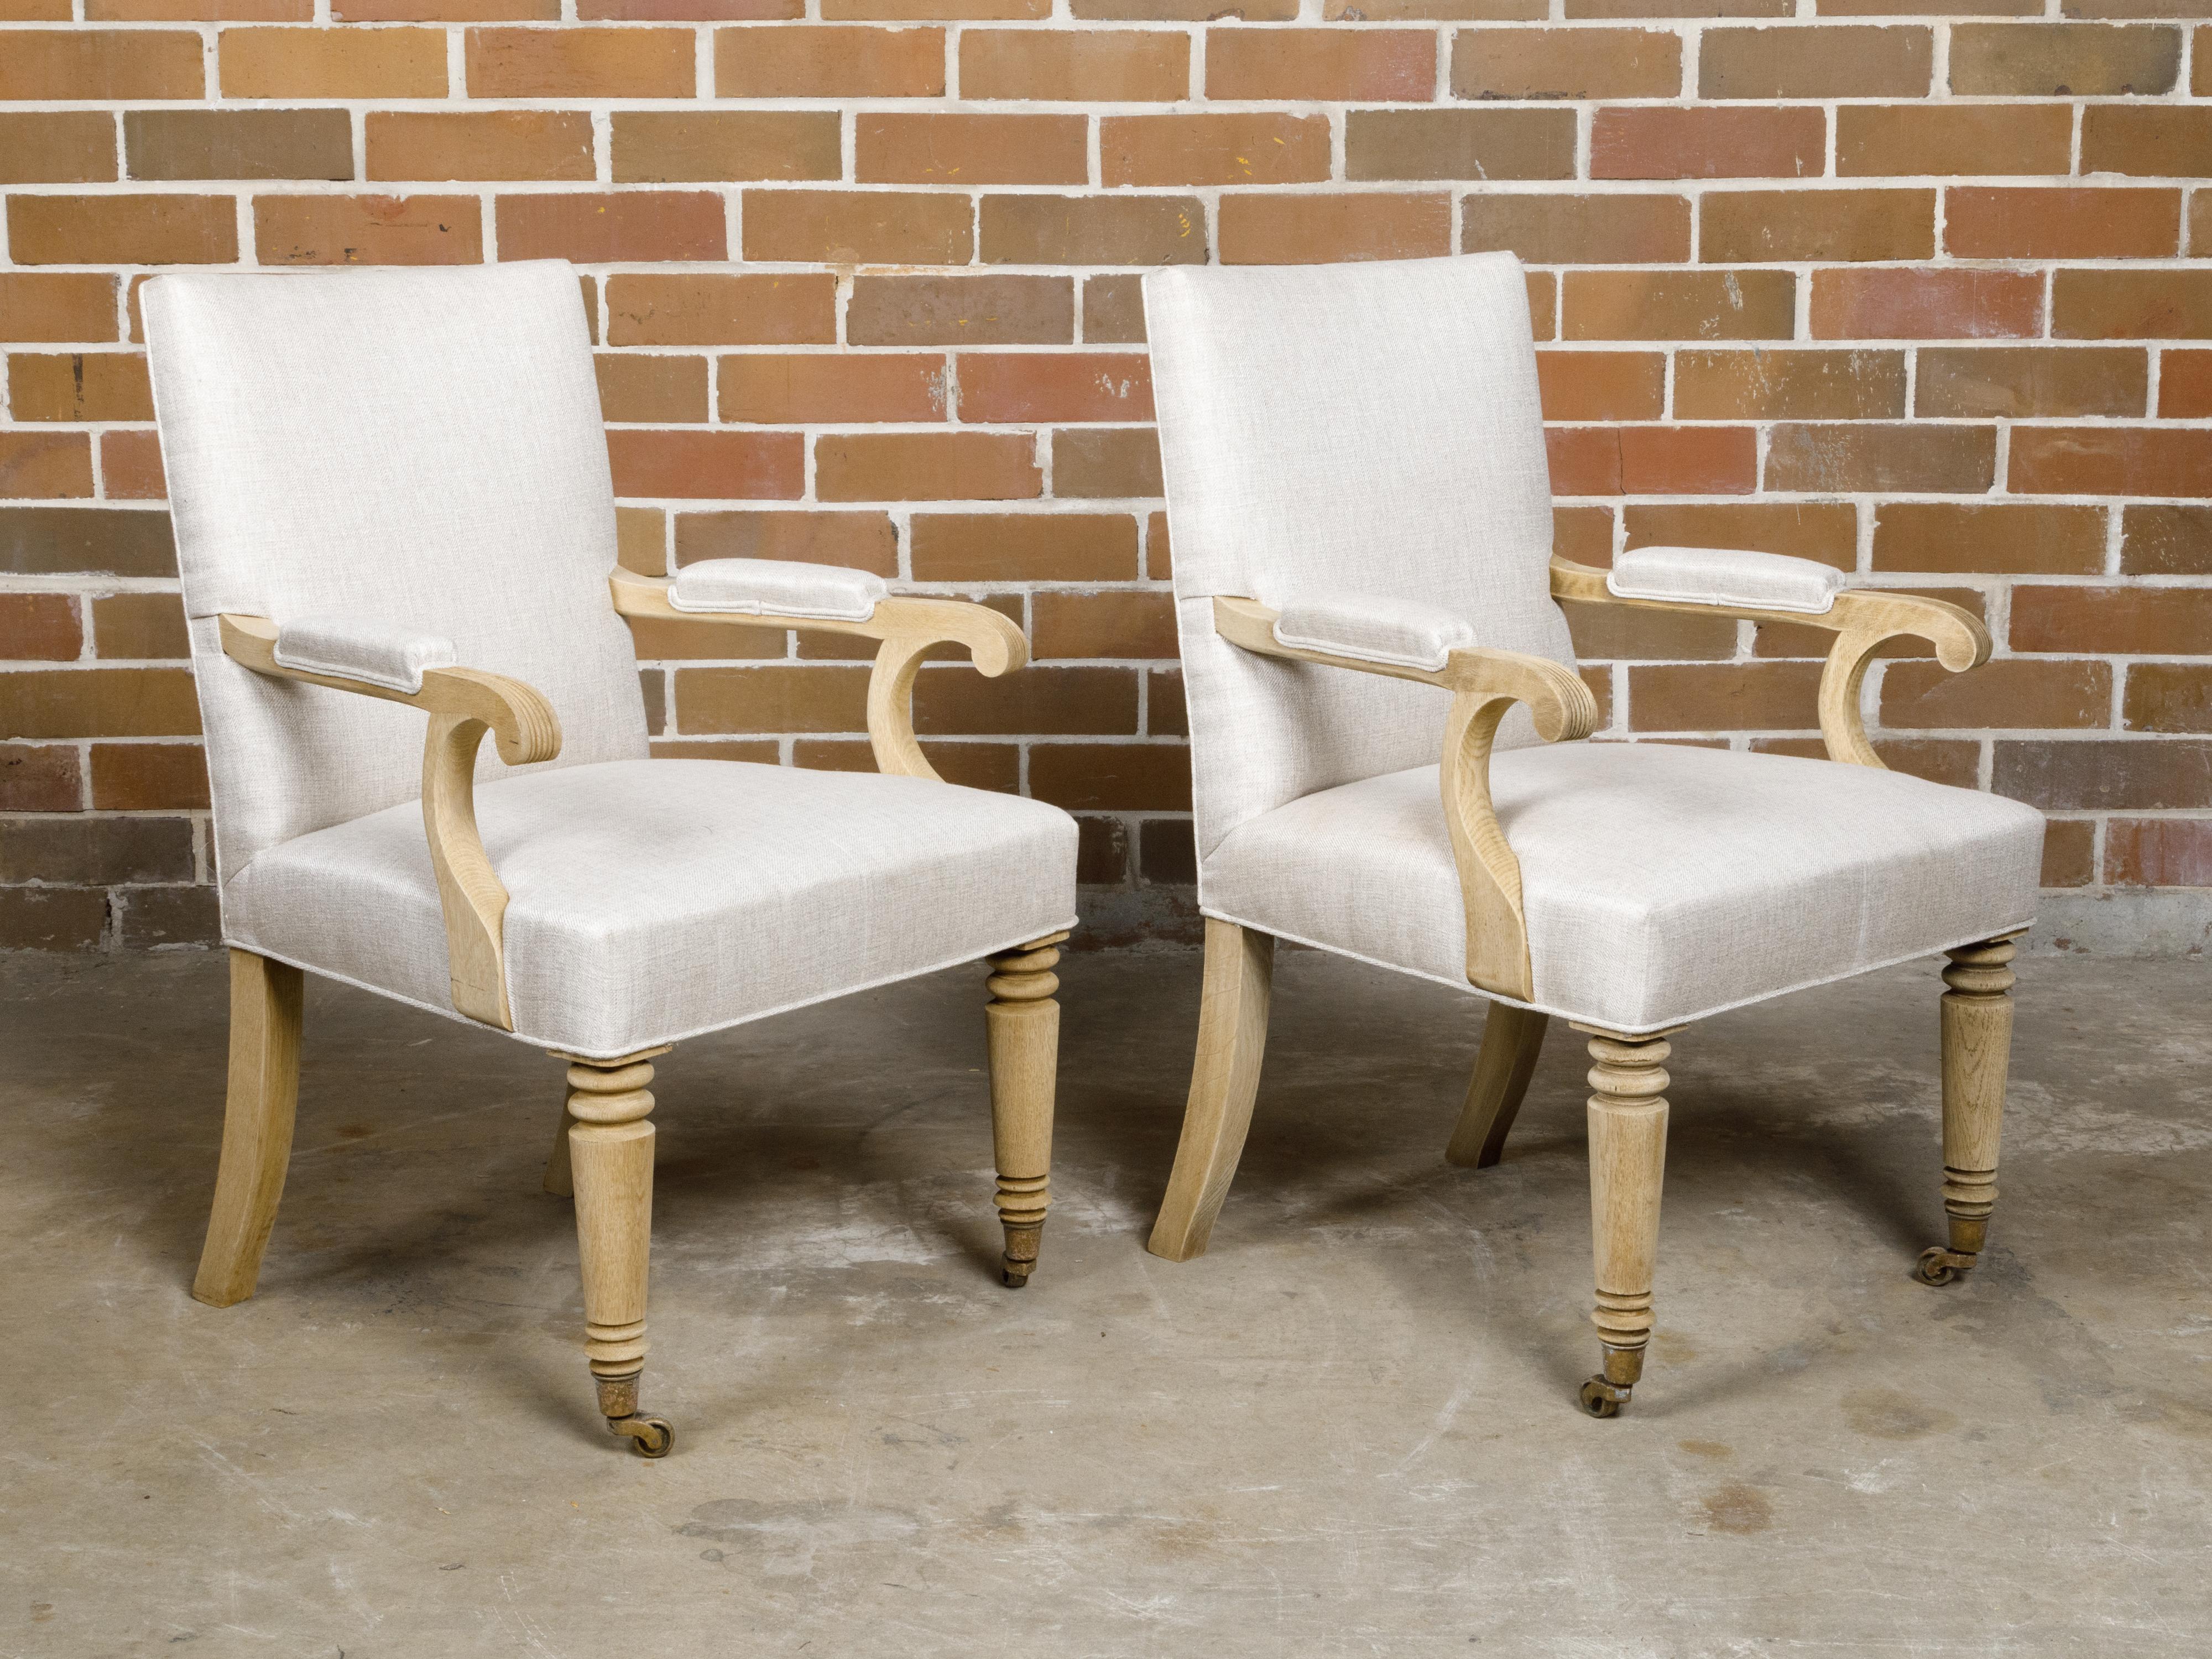 Turn of the Century English 1900s Bleached Armchairs with Linen Upholstery, Pair For Sale 9